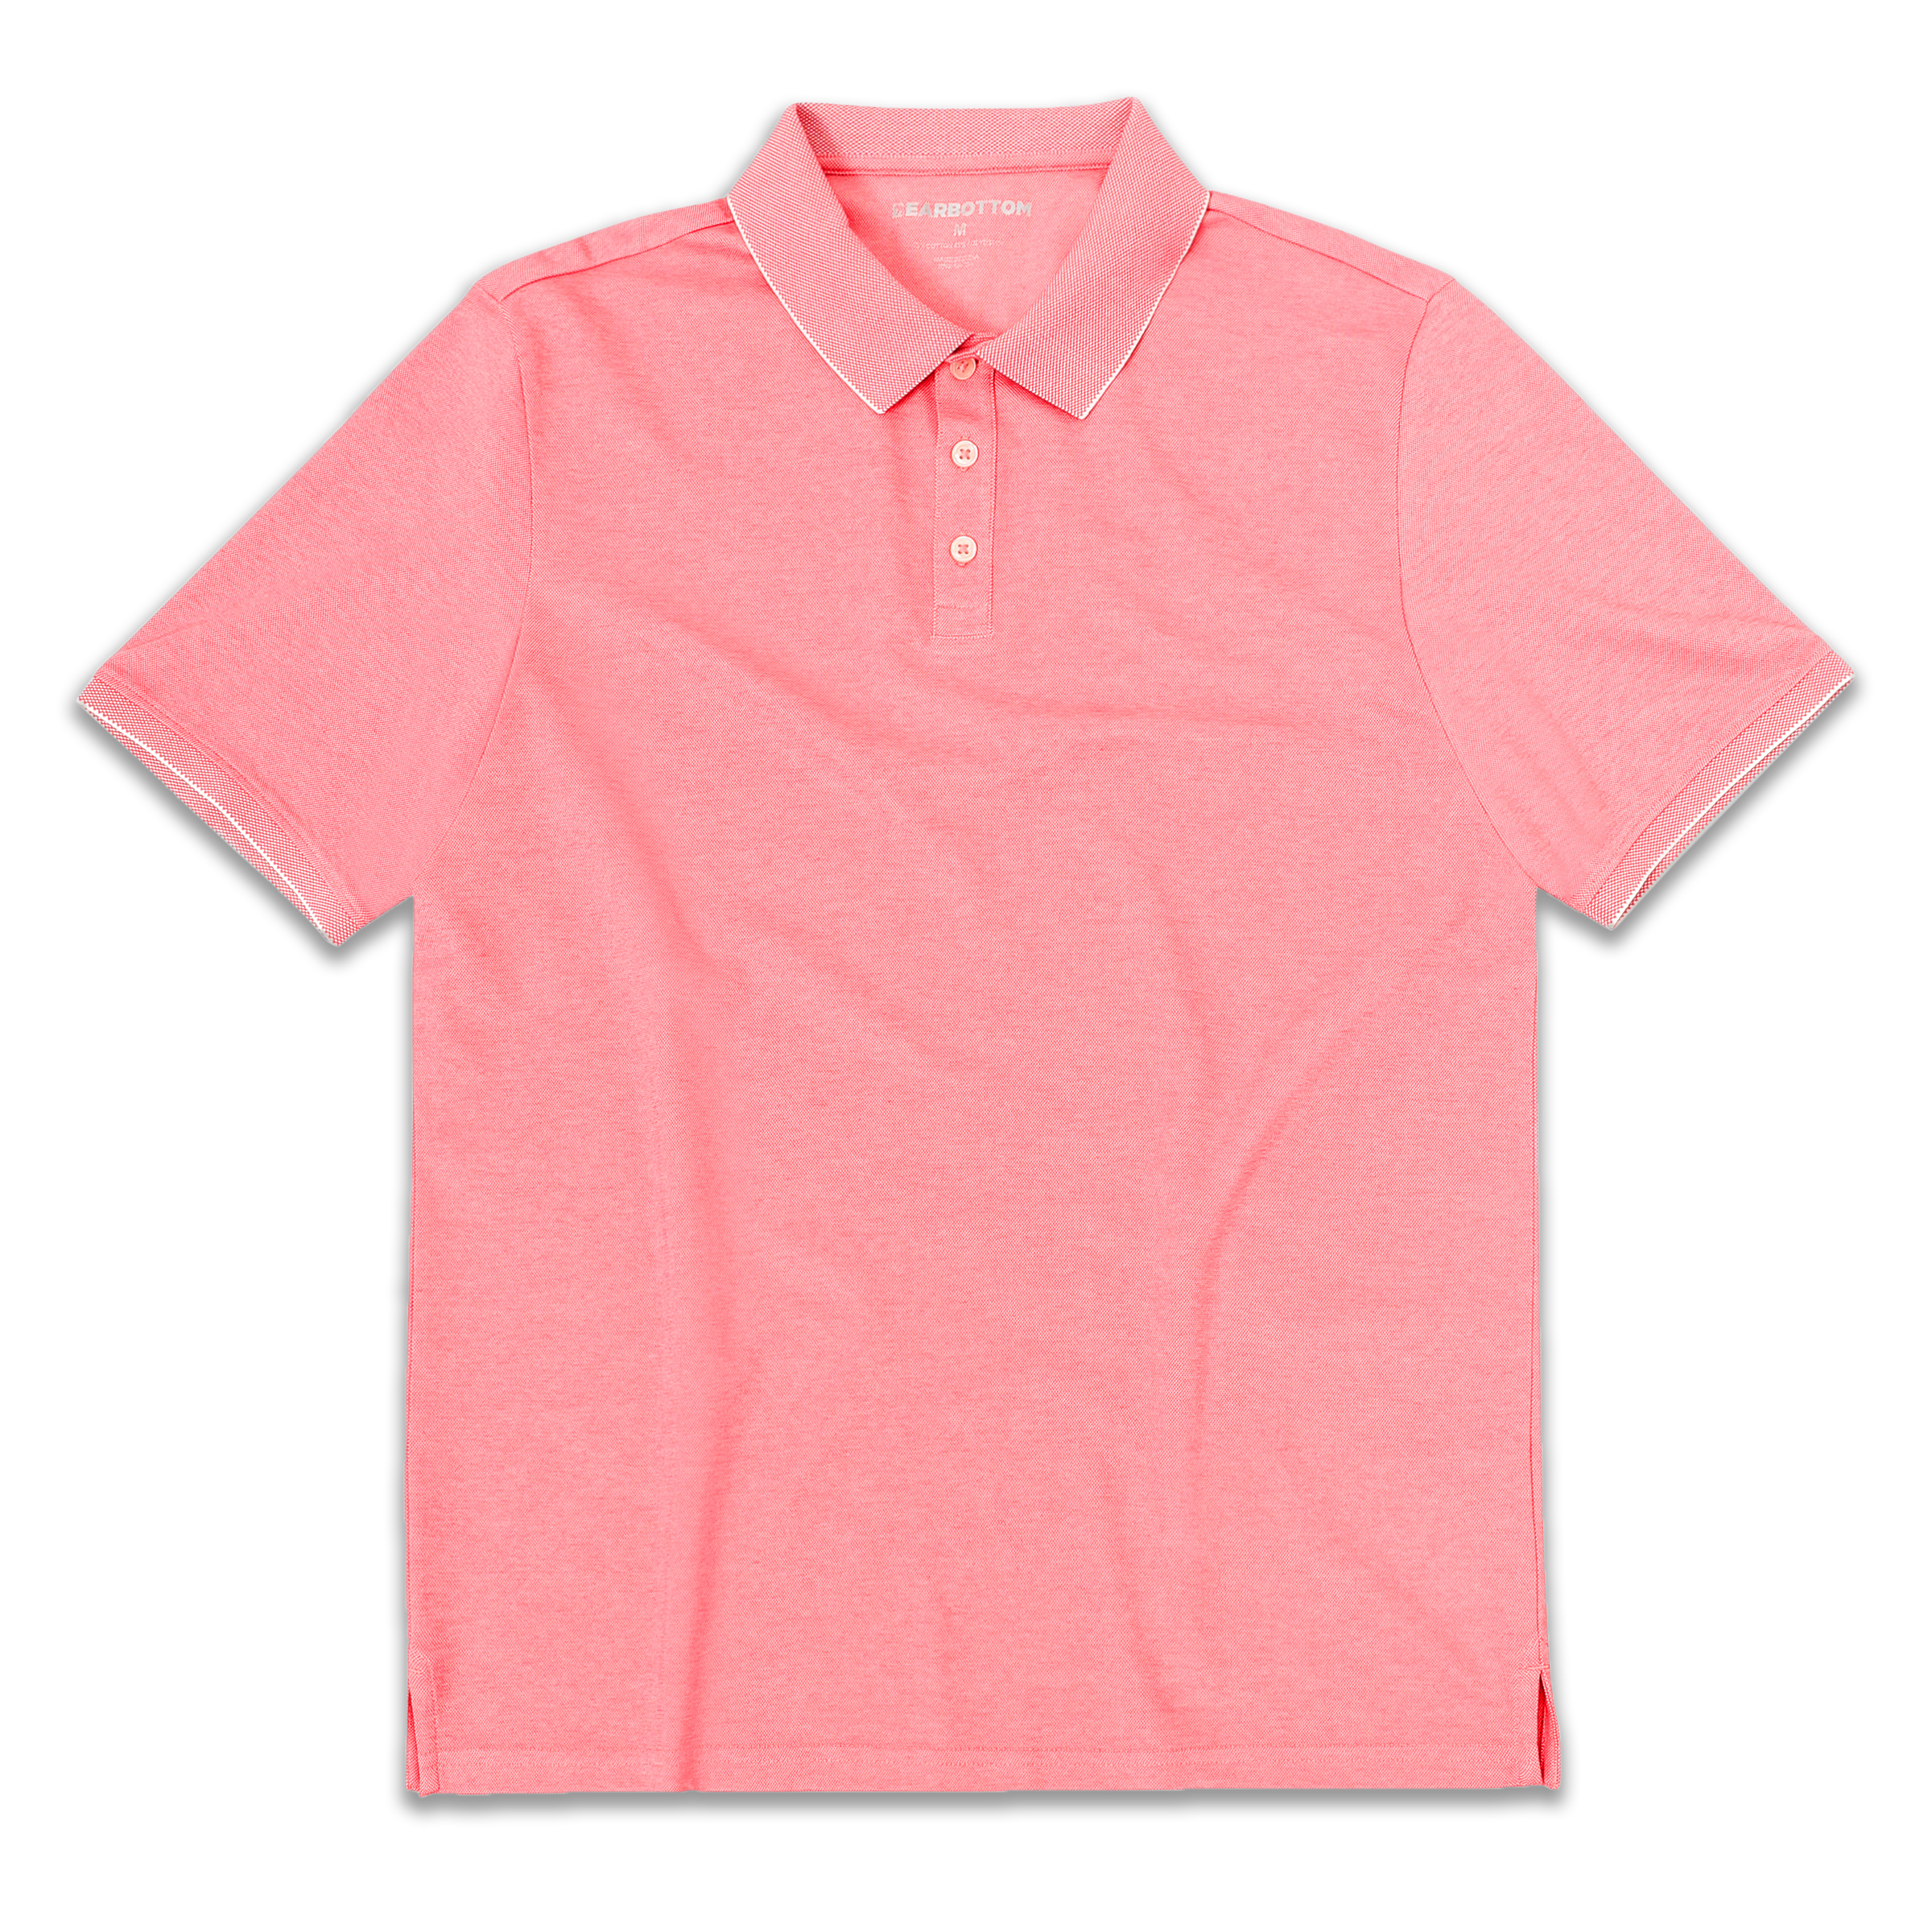 Range Polo Coral front with ribbed collar, ribbed short sleeves, and 3 white buttons